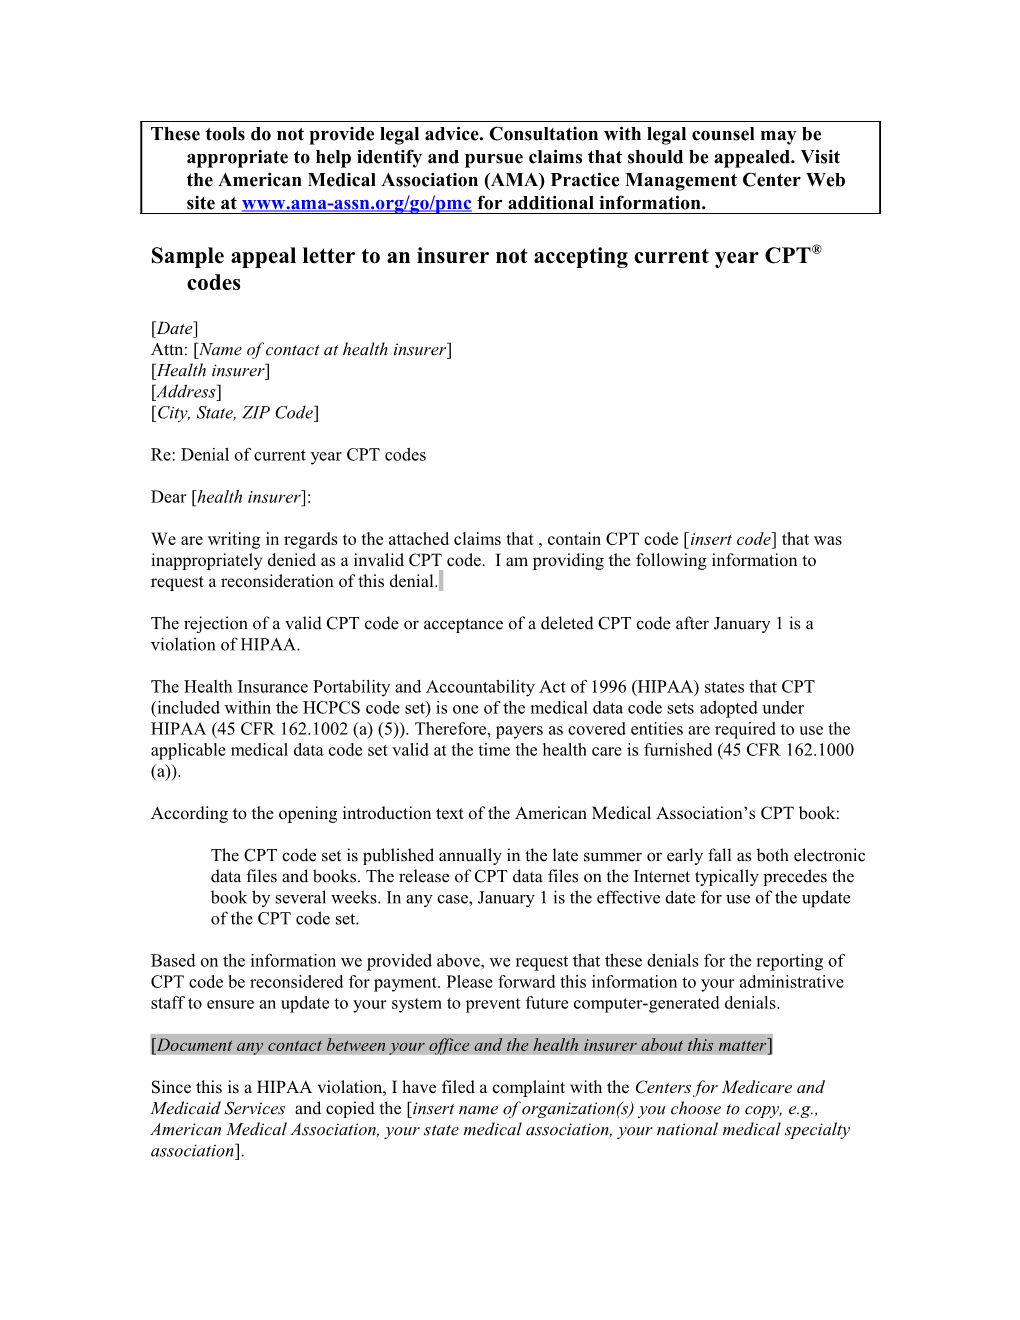 Sample Appeal Letter Regarding Insurers Not Accepting New CPT Code Sets